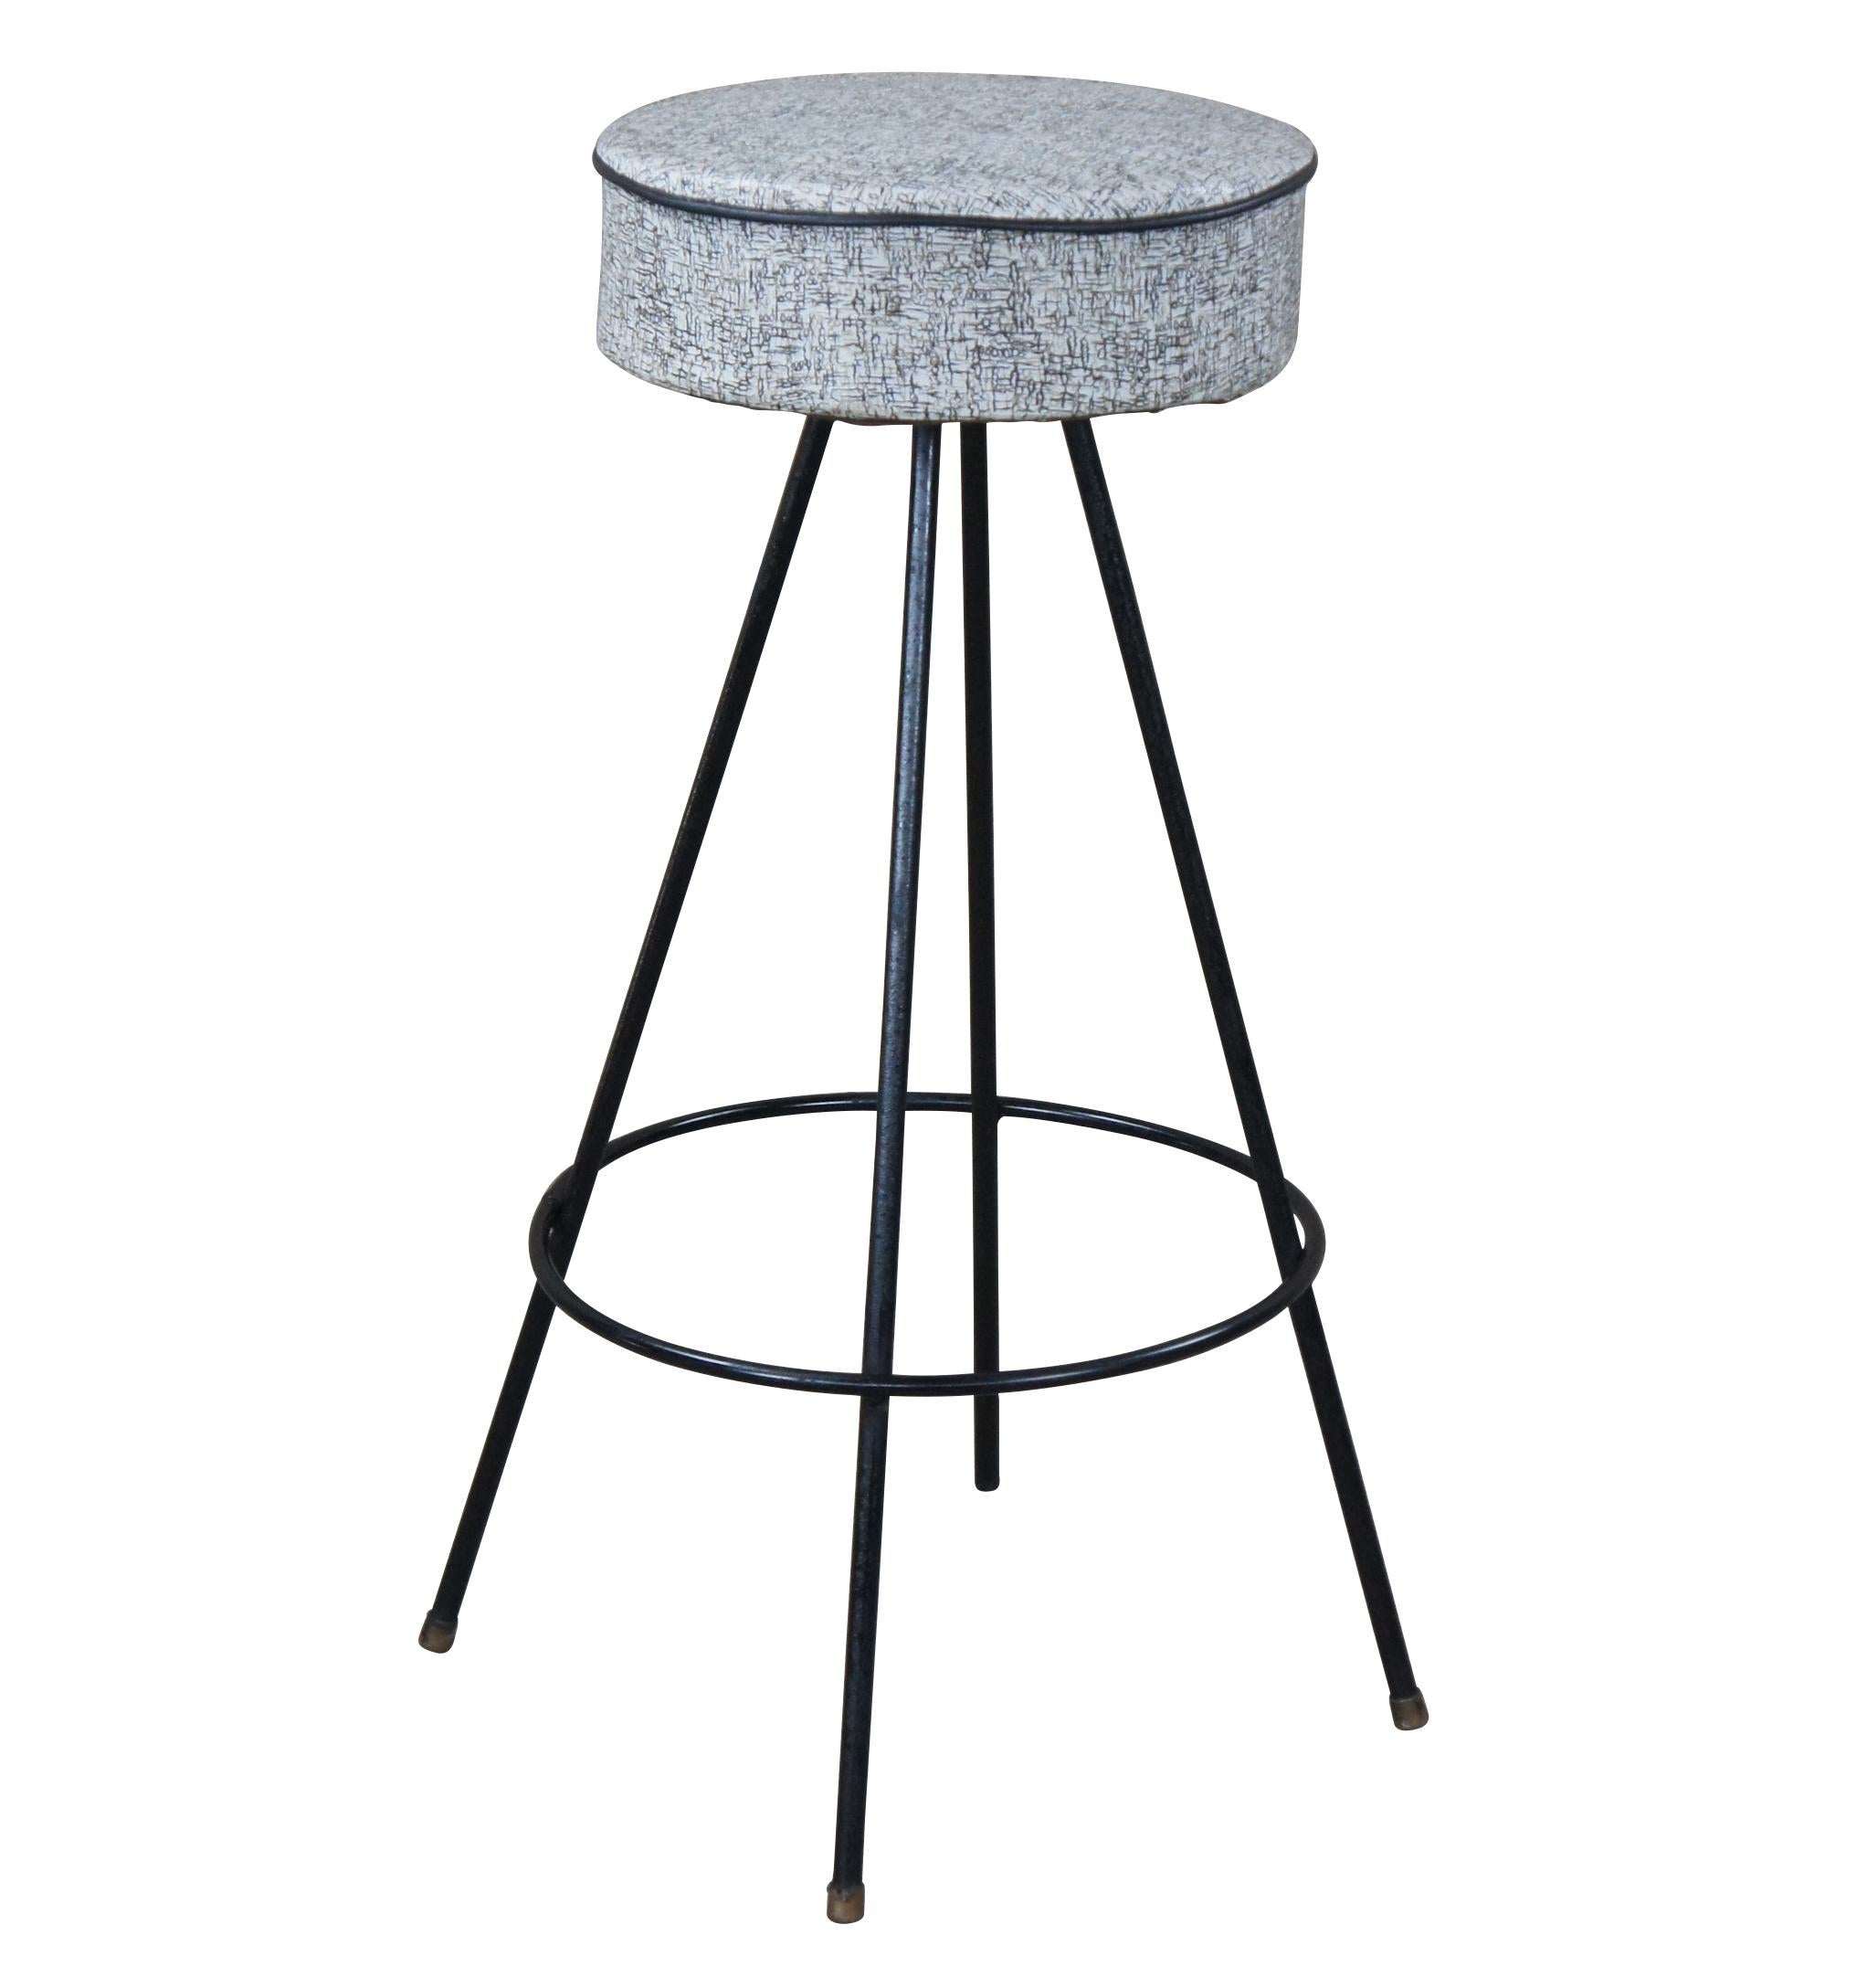 Atomic era bar stools. Made from wrought iron with a vinyl seat. Features a round seat over 4 legs leading to foot rest and capped feet.

Seat Diameter - 12